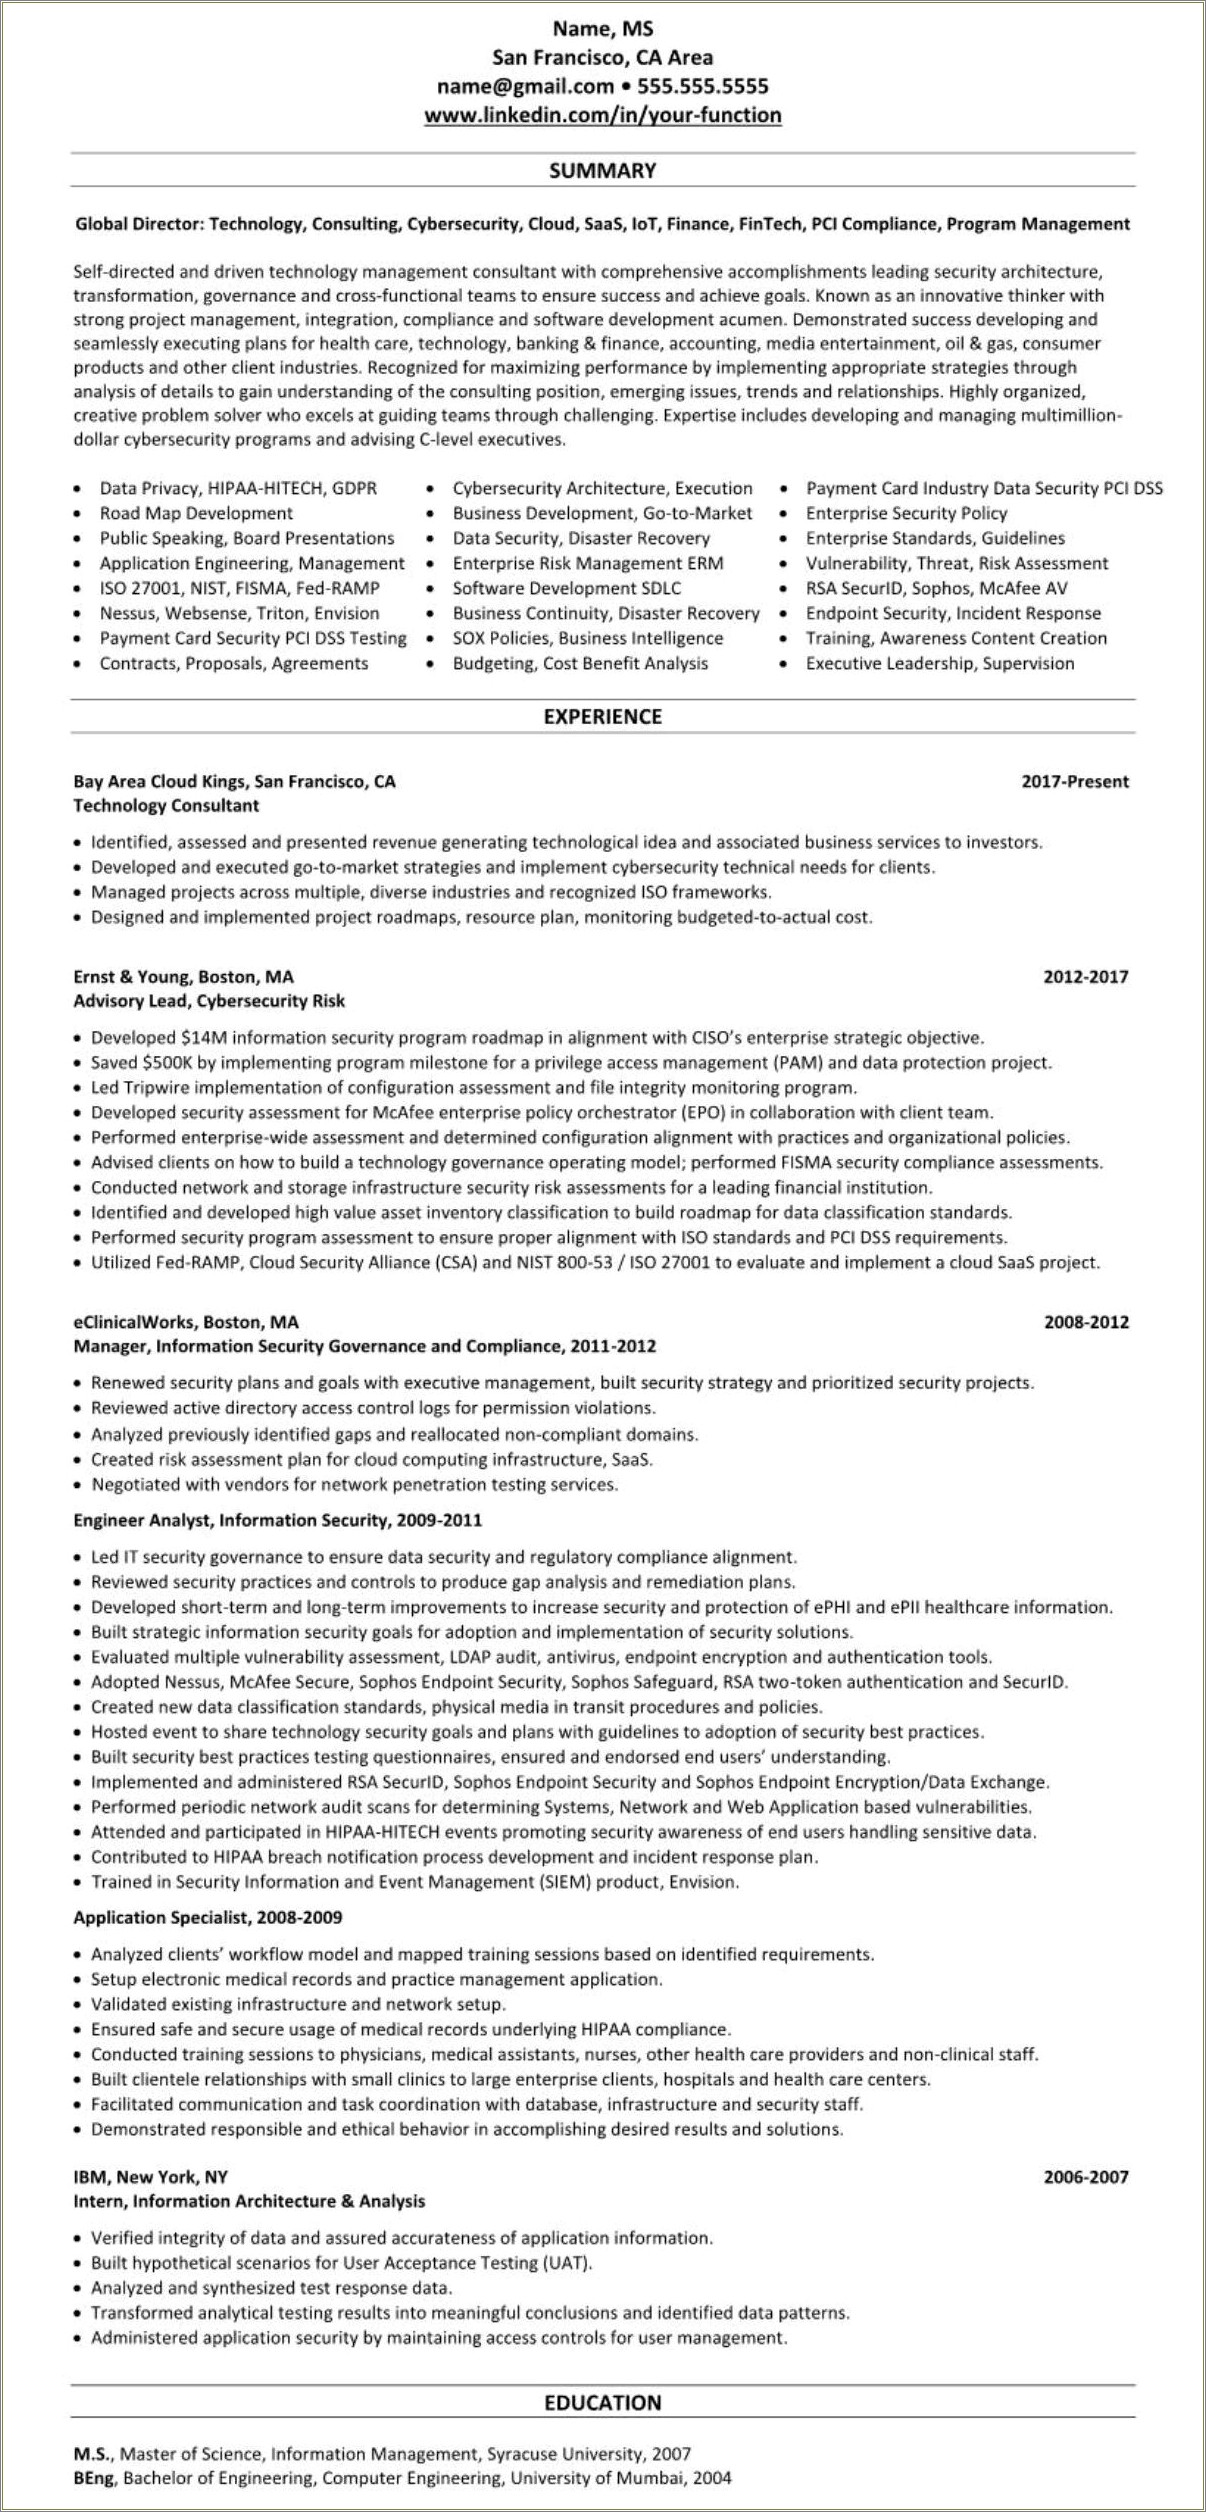 Cyber Security Nist Project Based Resume Sample